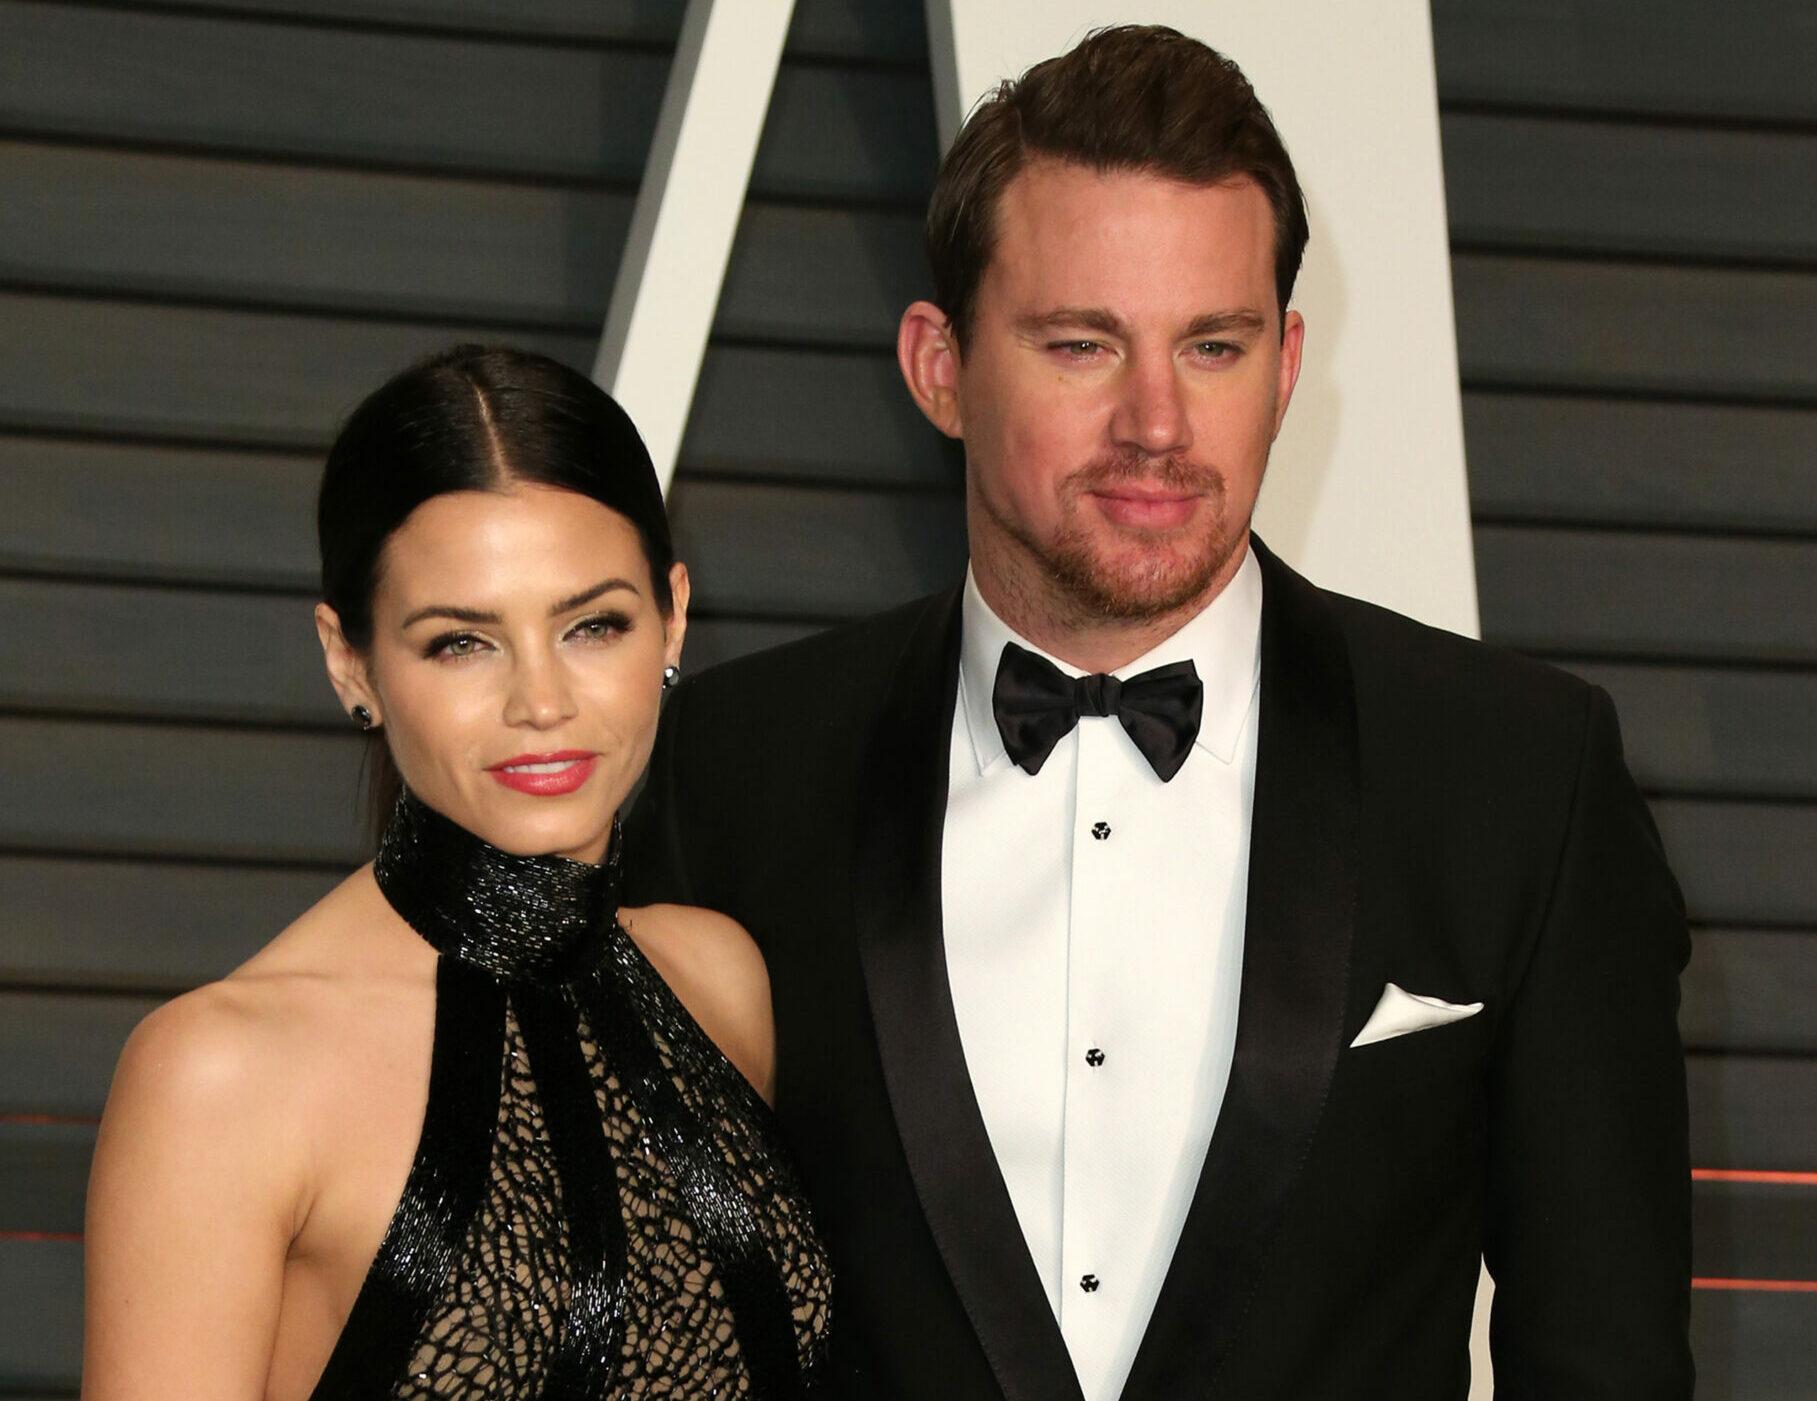 CHANNING TATUM and JENNA DEWAN are splitting after almost nine years of marriage.